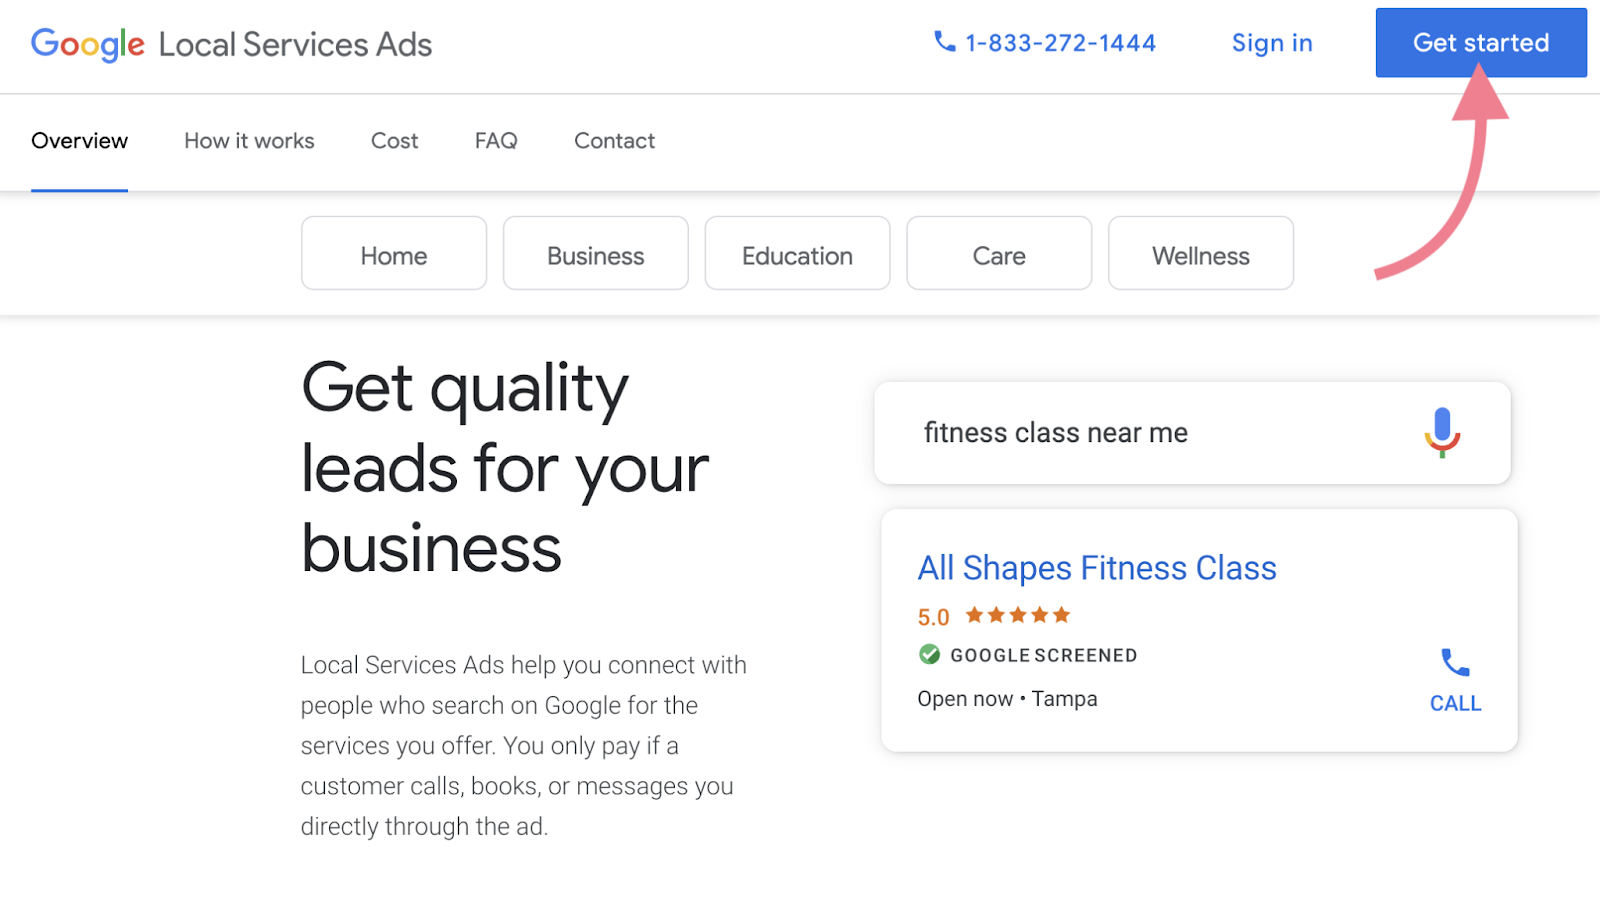 Google Local Services Ads homepage